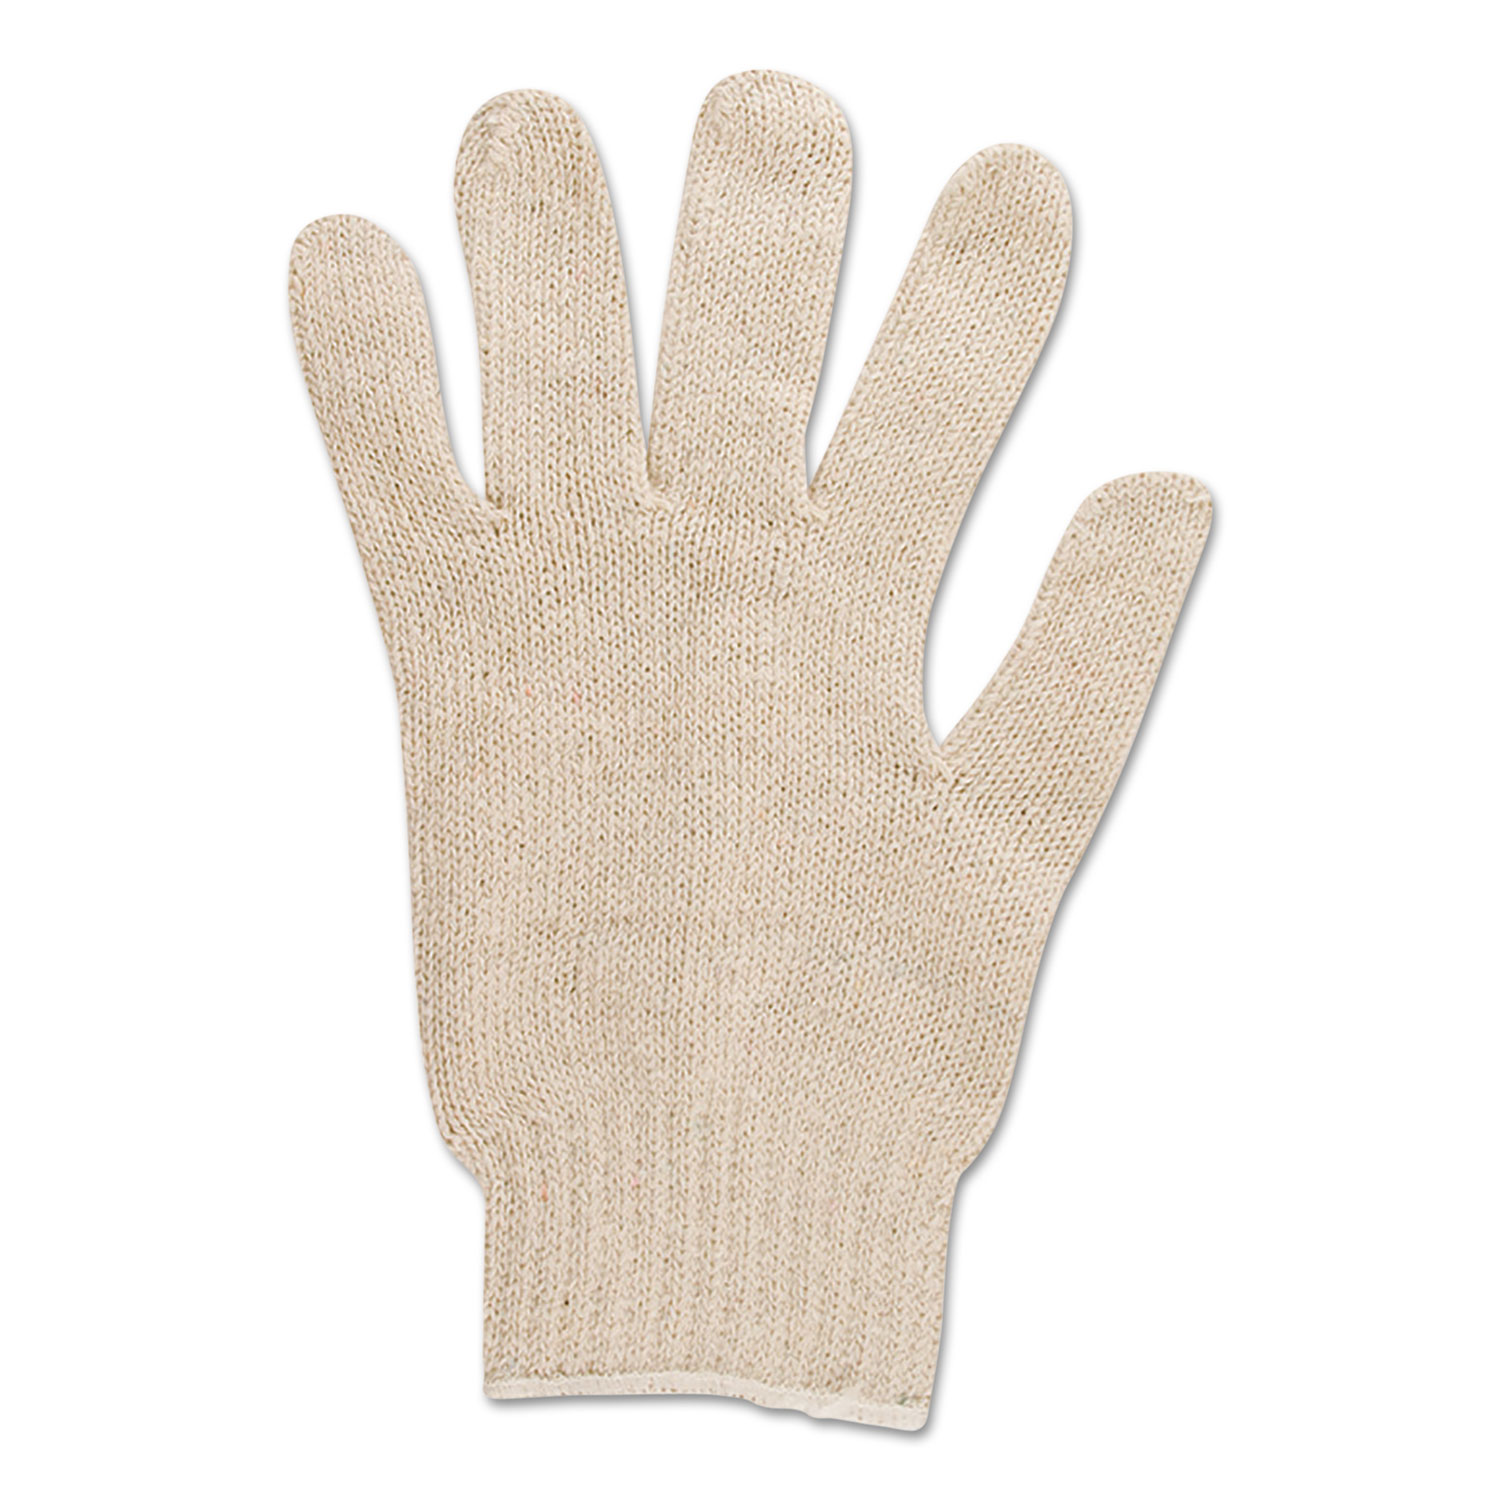  AnsellPro 104361 Multiknit Heavy-Duty Cotton/Poly Gloves, Size 9, Off White, 12 Pairs (ANS766109) 